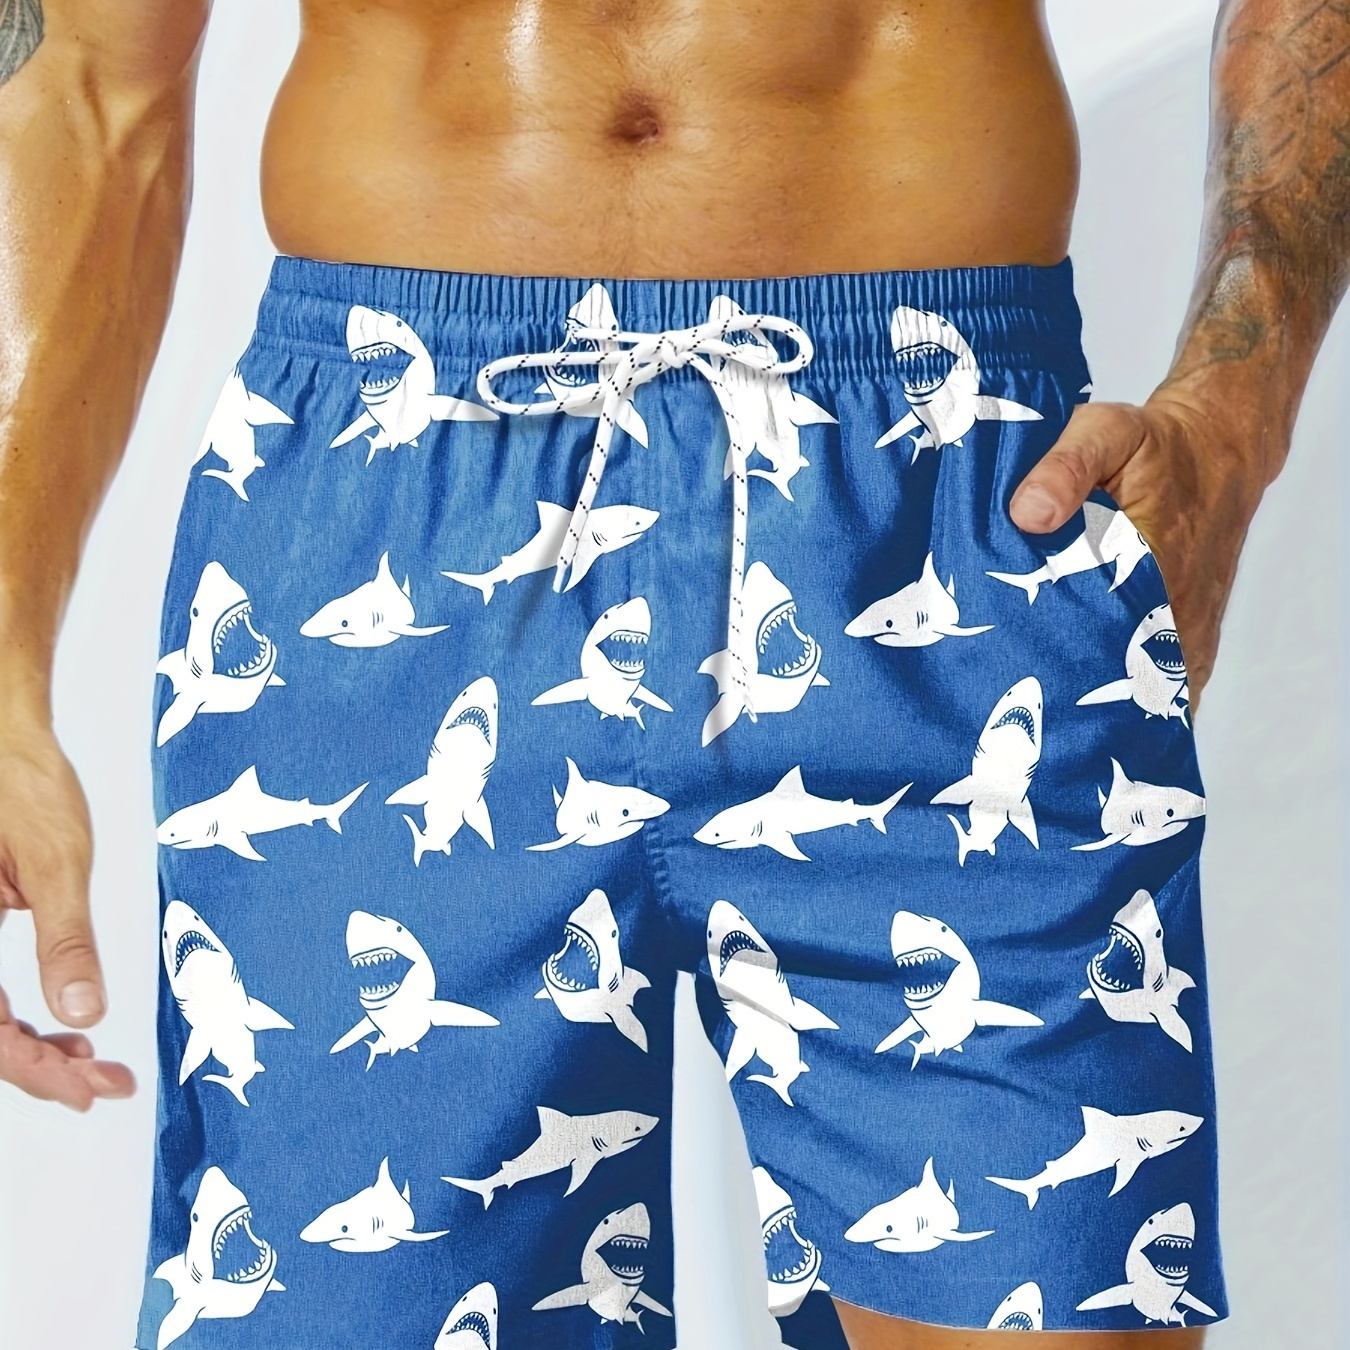 

1pc, Men's Cartoon Style Shark Graphic Pattern Board Shorts With Drawstring And Pockets, Chic And Stylish Shorts For Summer Pool And Beach Holiday Wear